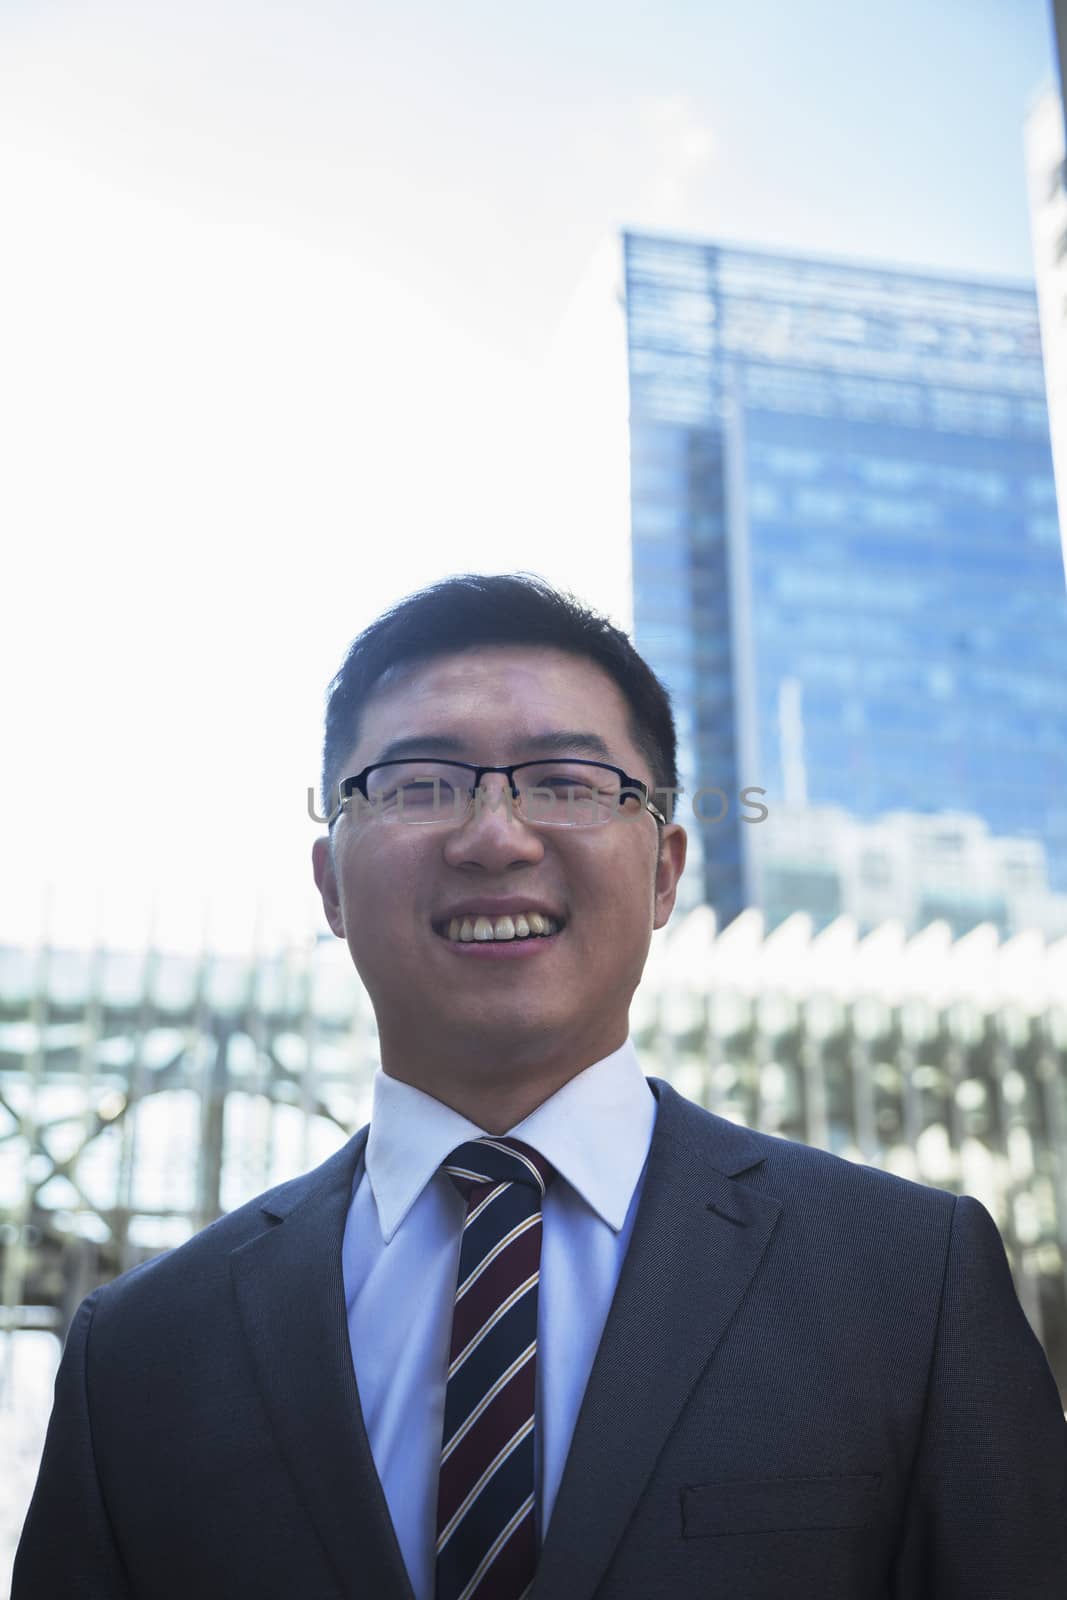 Portrait of smiling businessman outdoors in Beijing, China